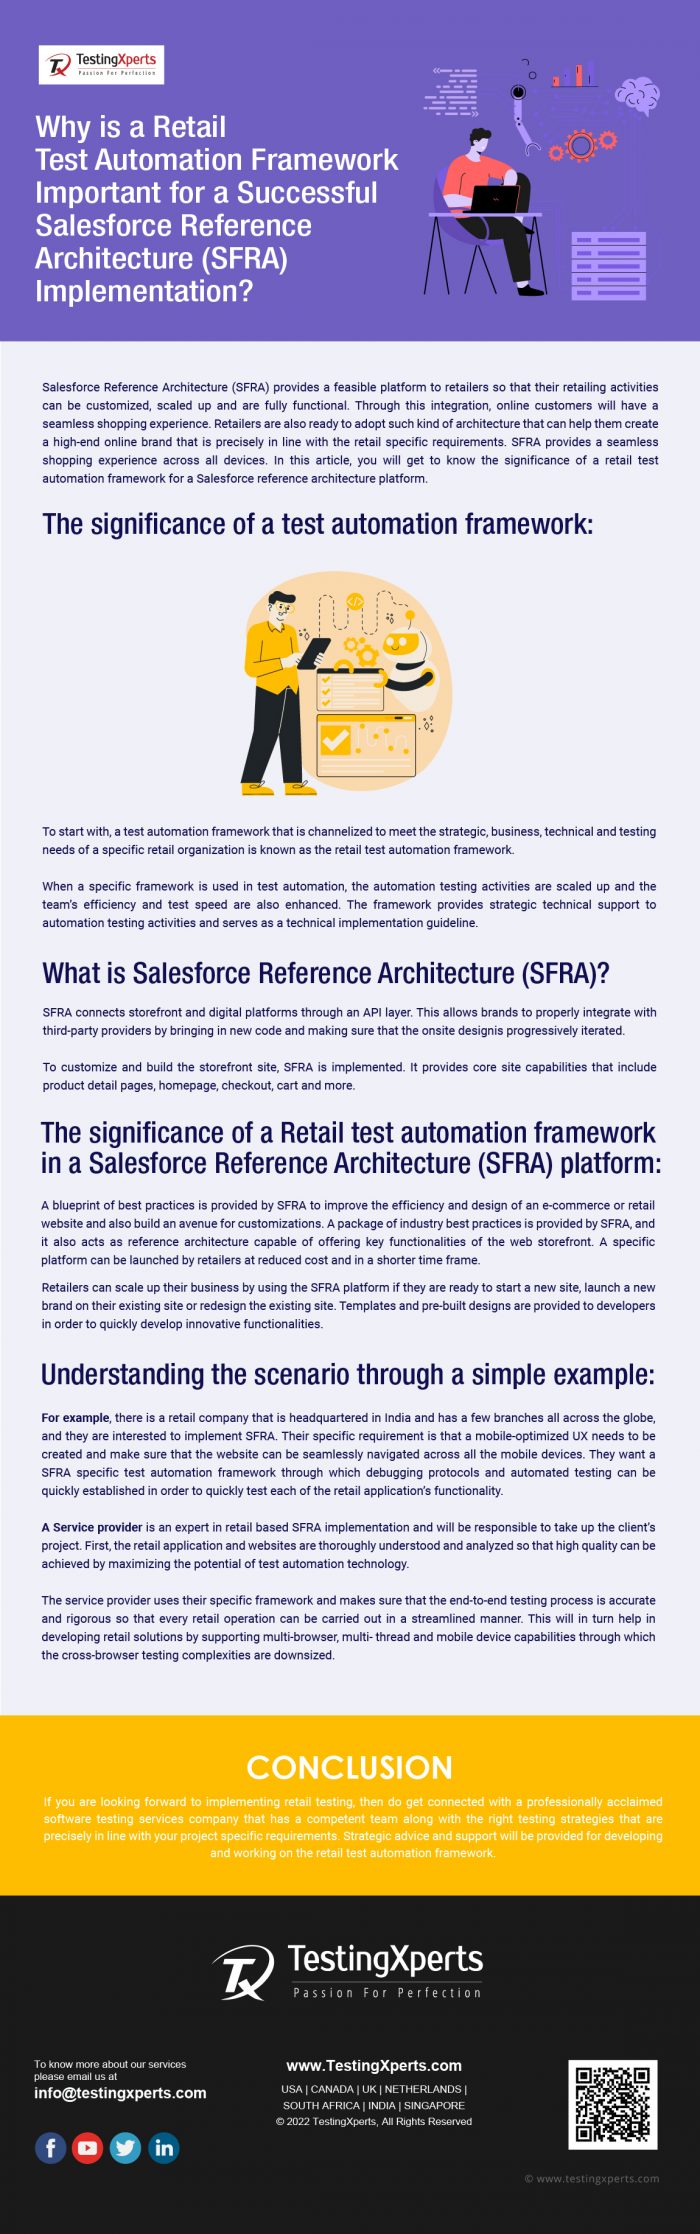 Why is a Retail Test Automation Framework Important For A Successful SFRA Implementation?